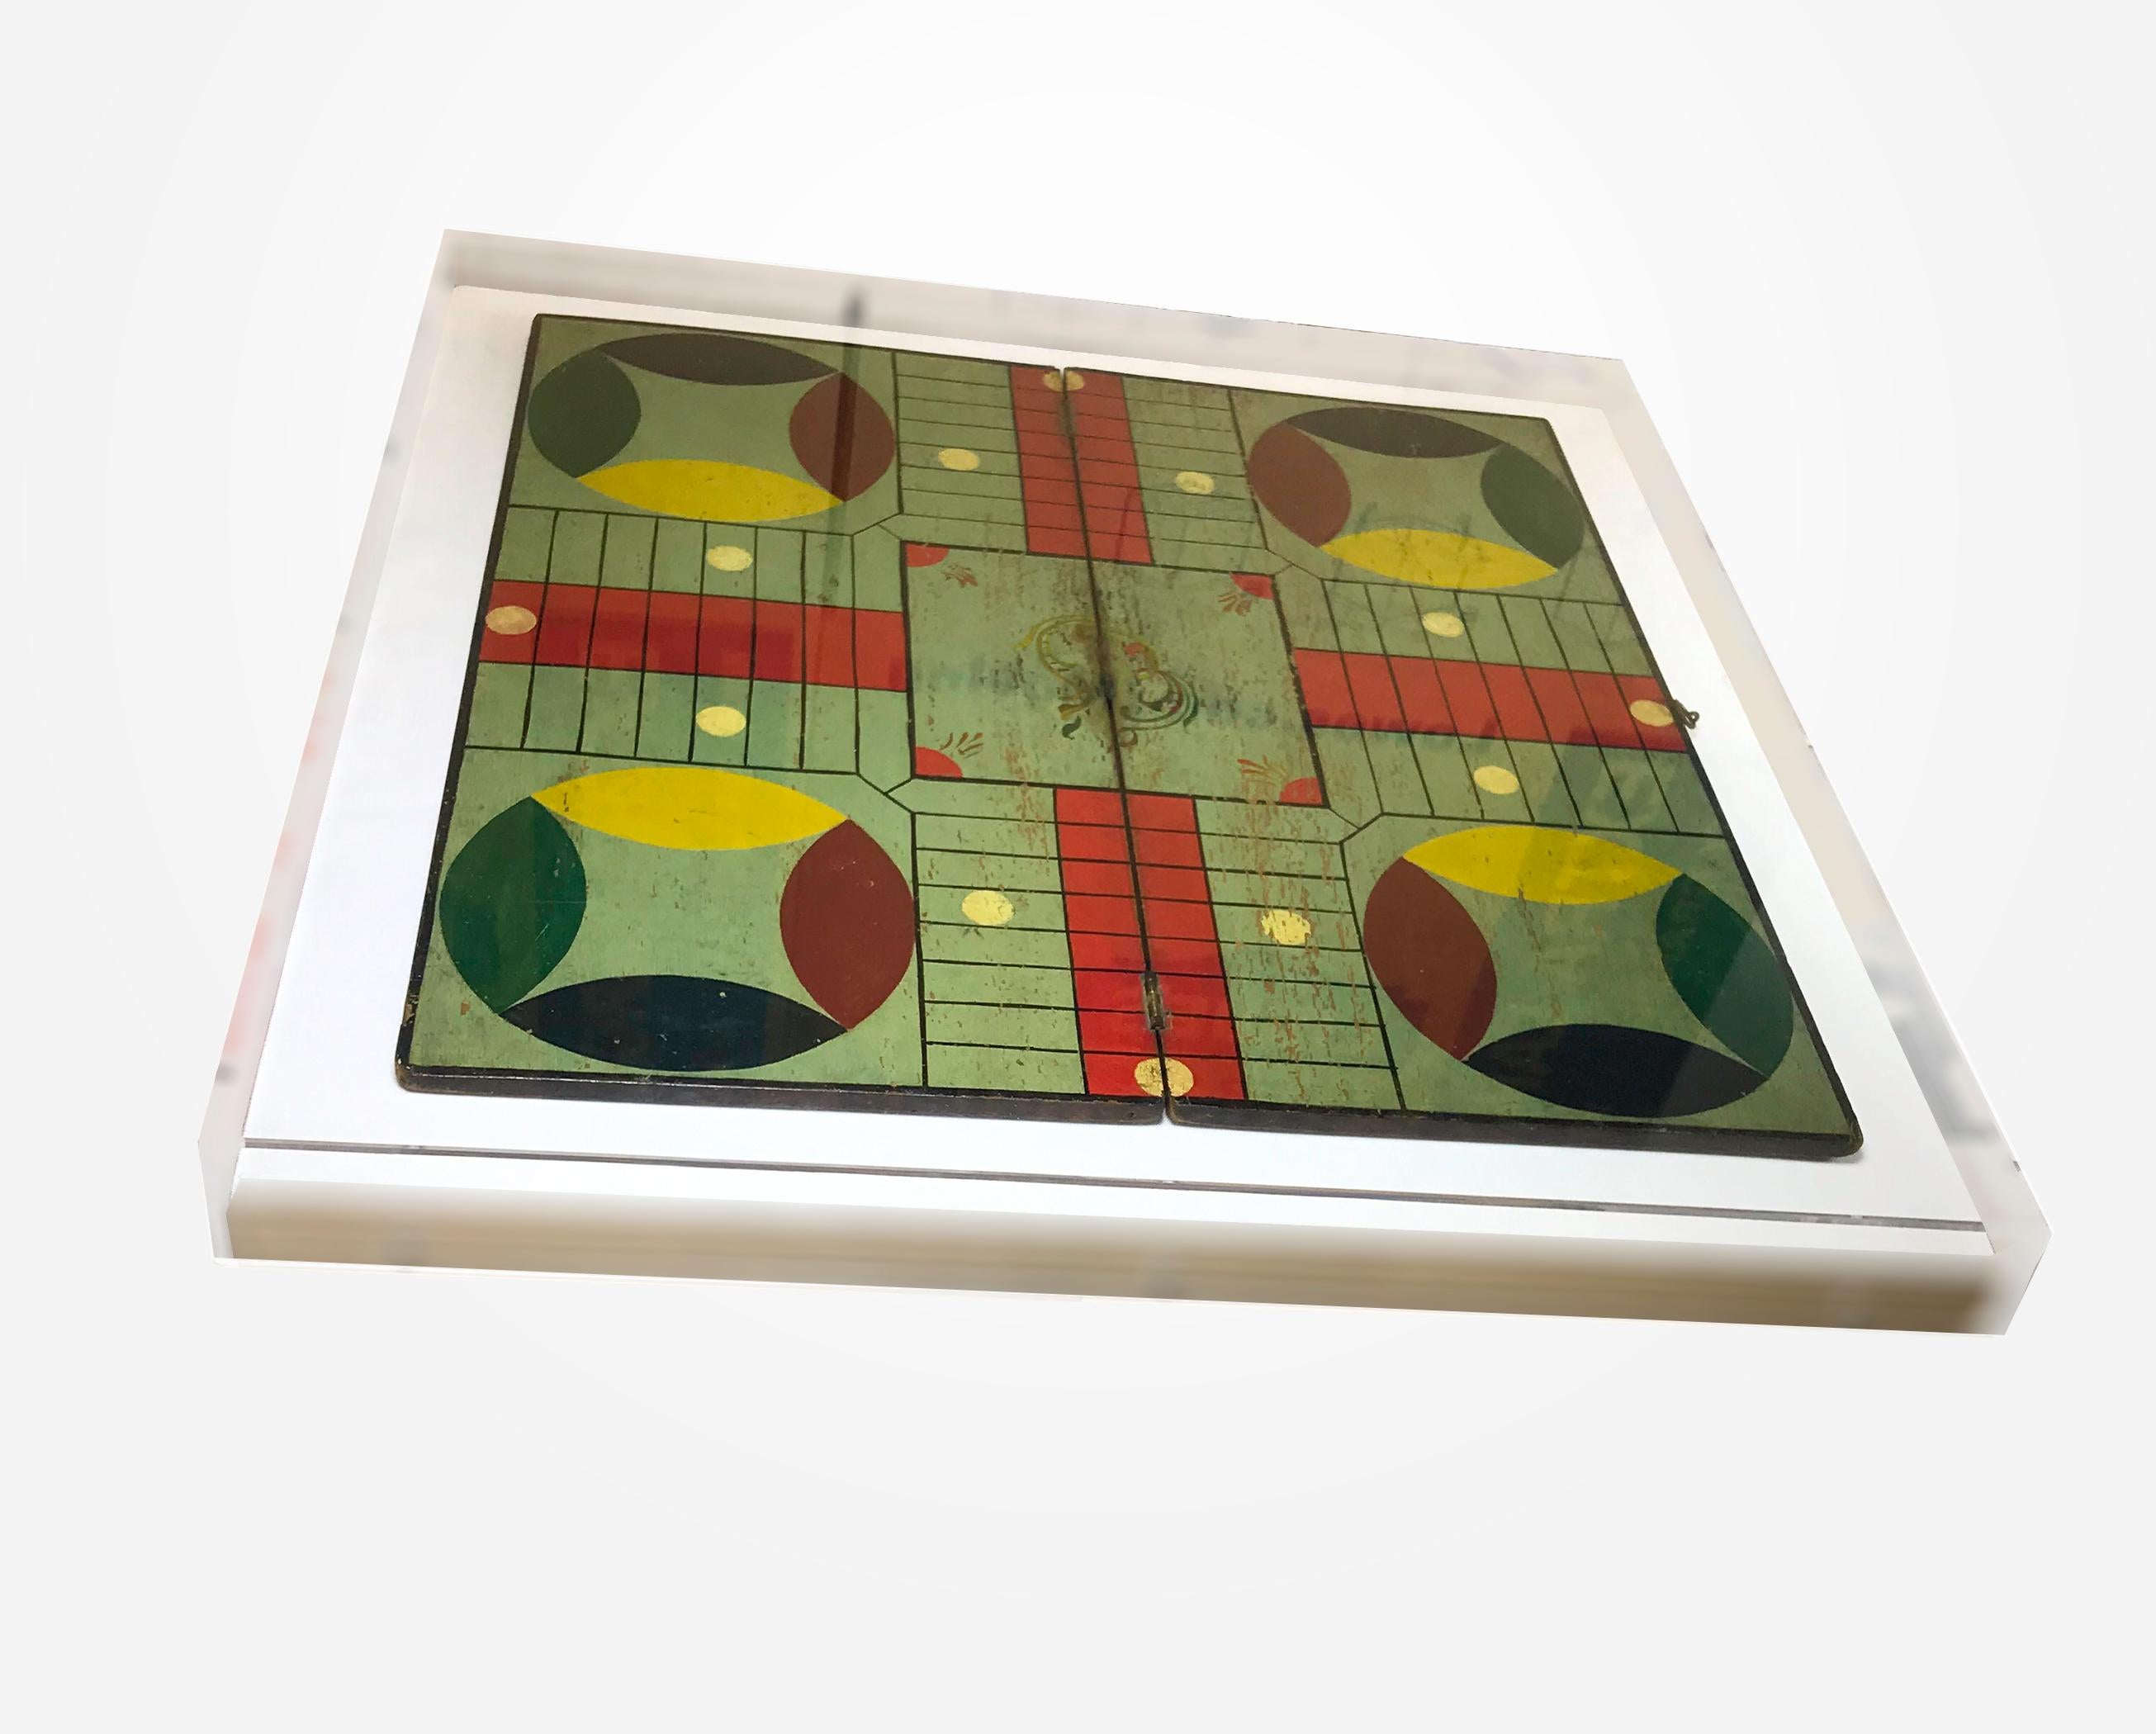 North American 19th Century Game Board Board Mounted in Lucite